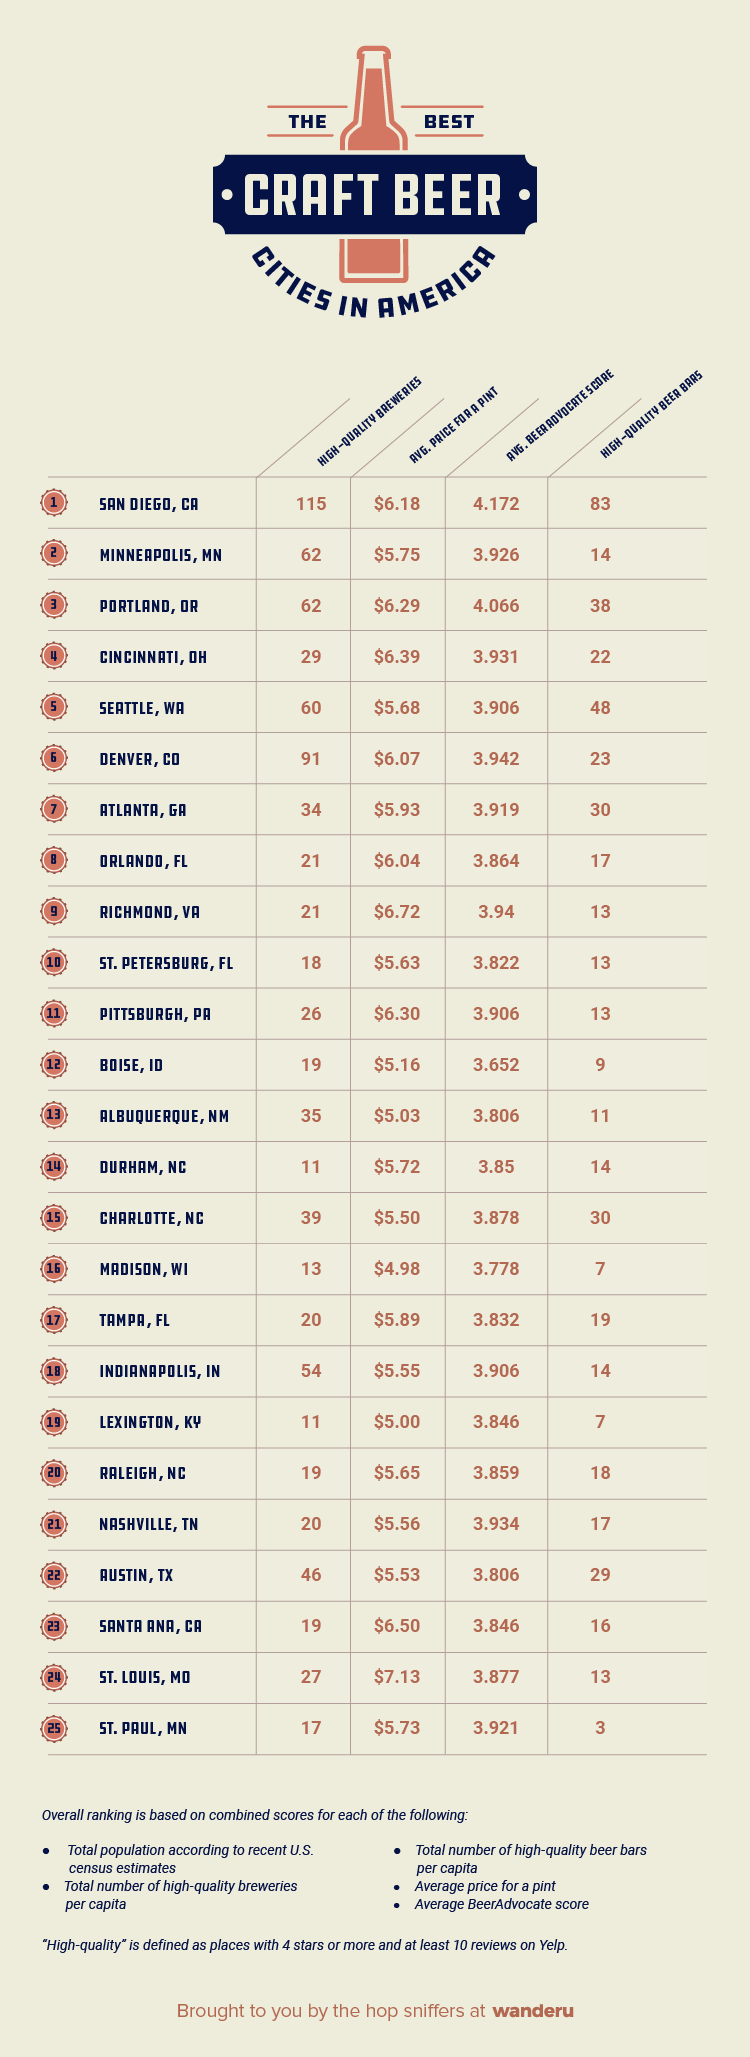 Ranking of the top 25 craft beer cities in the U.S.